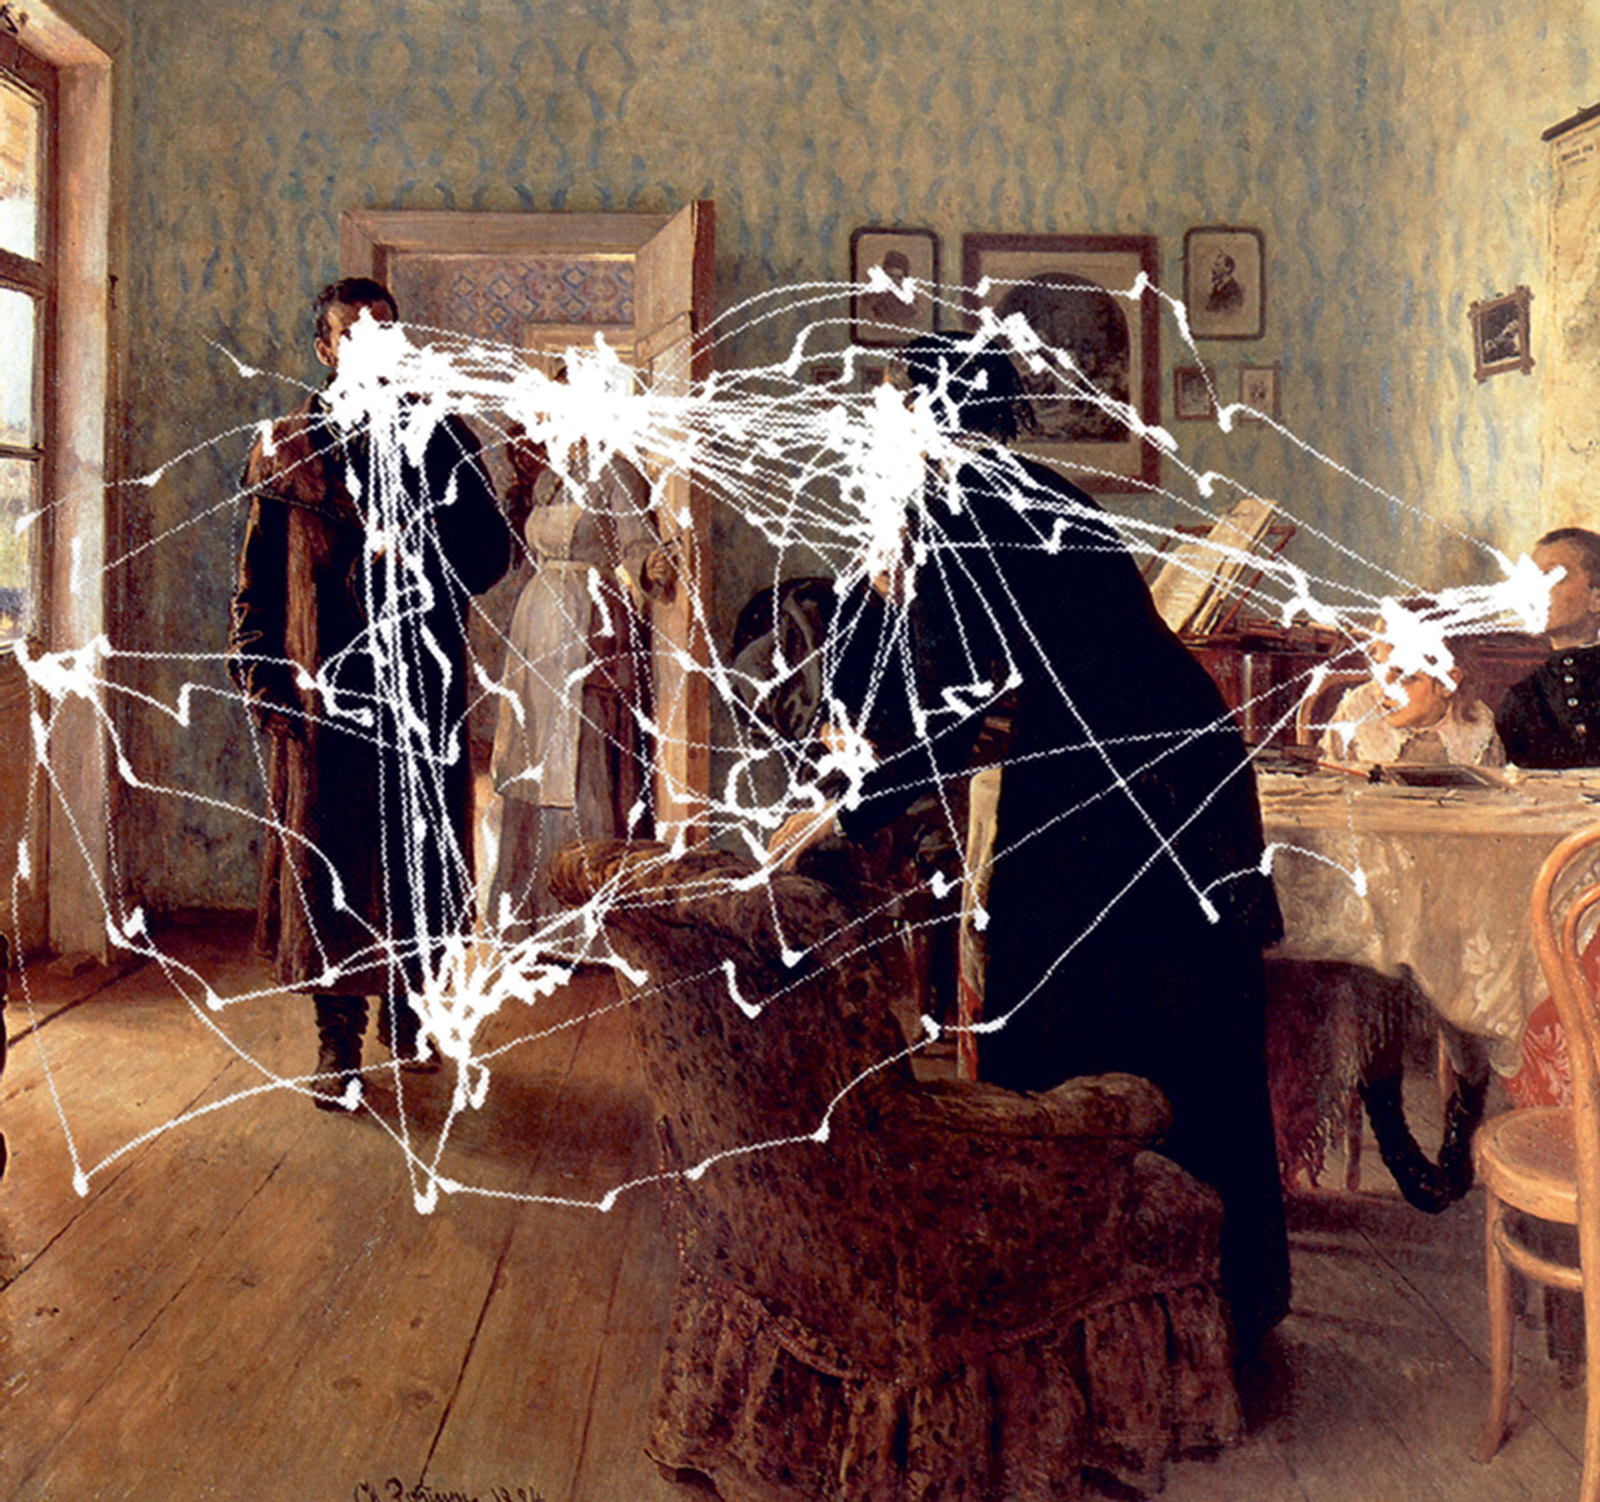 Ilya Repin’s eighteen eighty-four painting titled “An Unexpected Visitor,” marked with white lines that map the eye movements of a single subject asked by Yarbus to examine the painting freely.